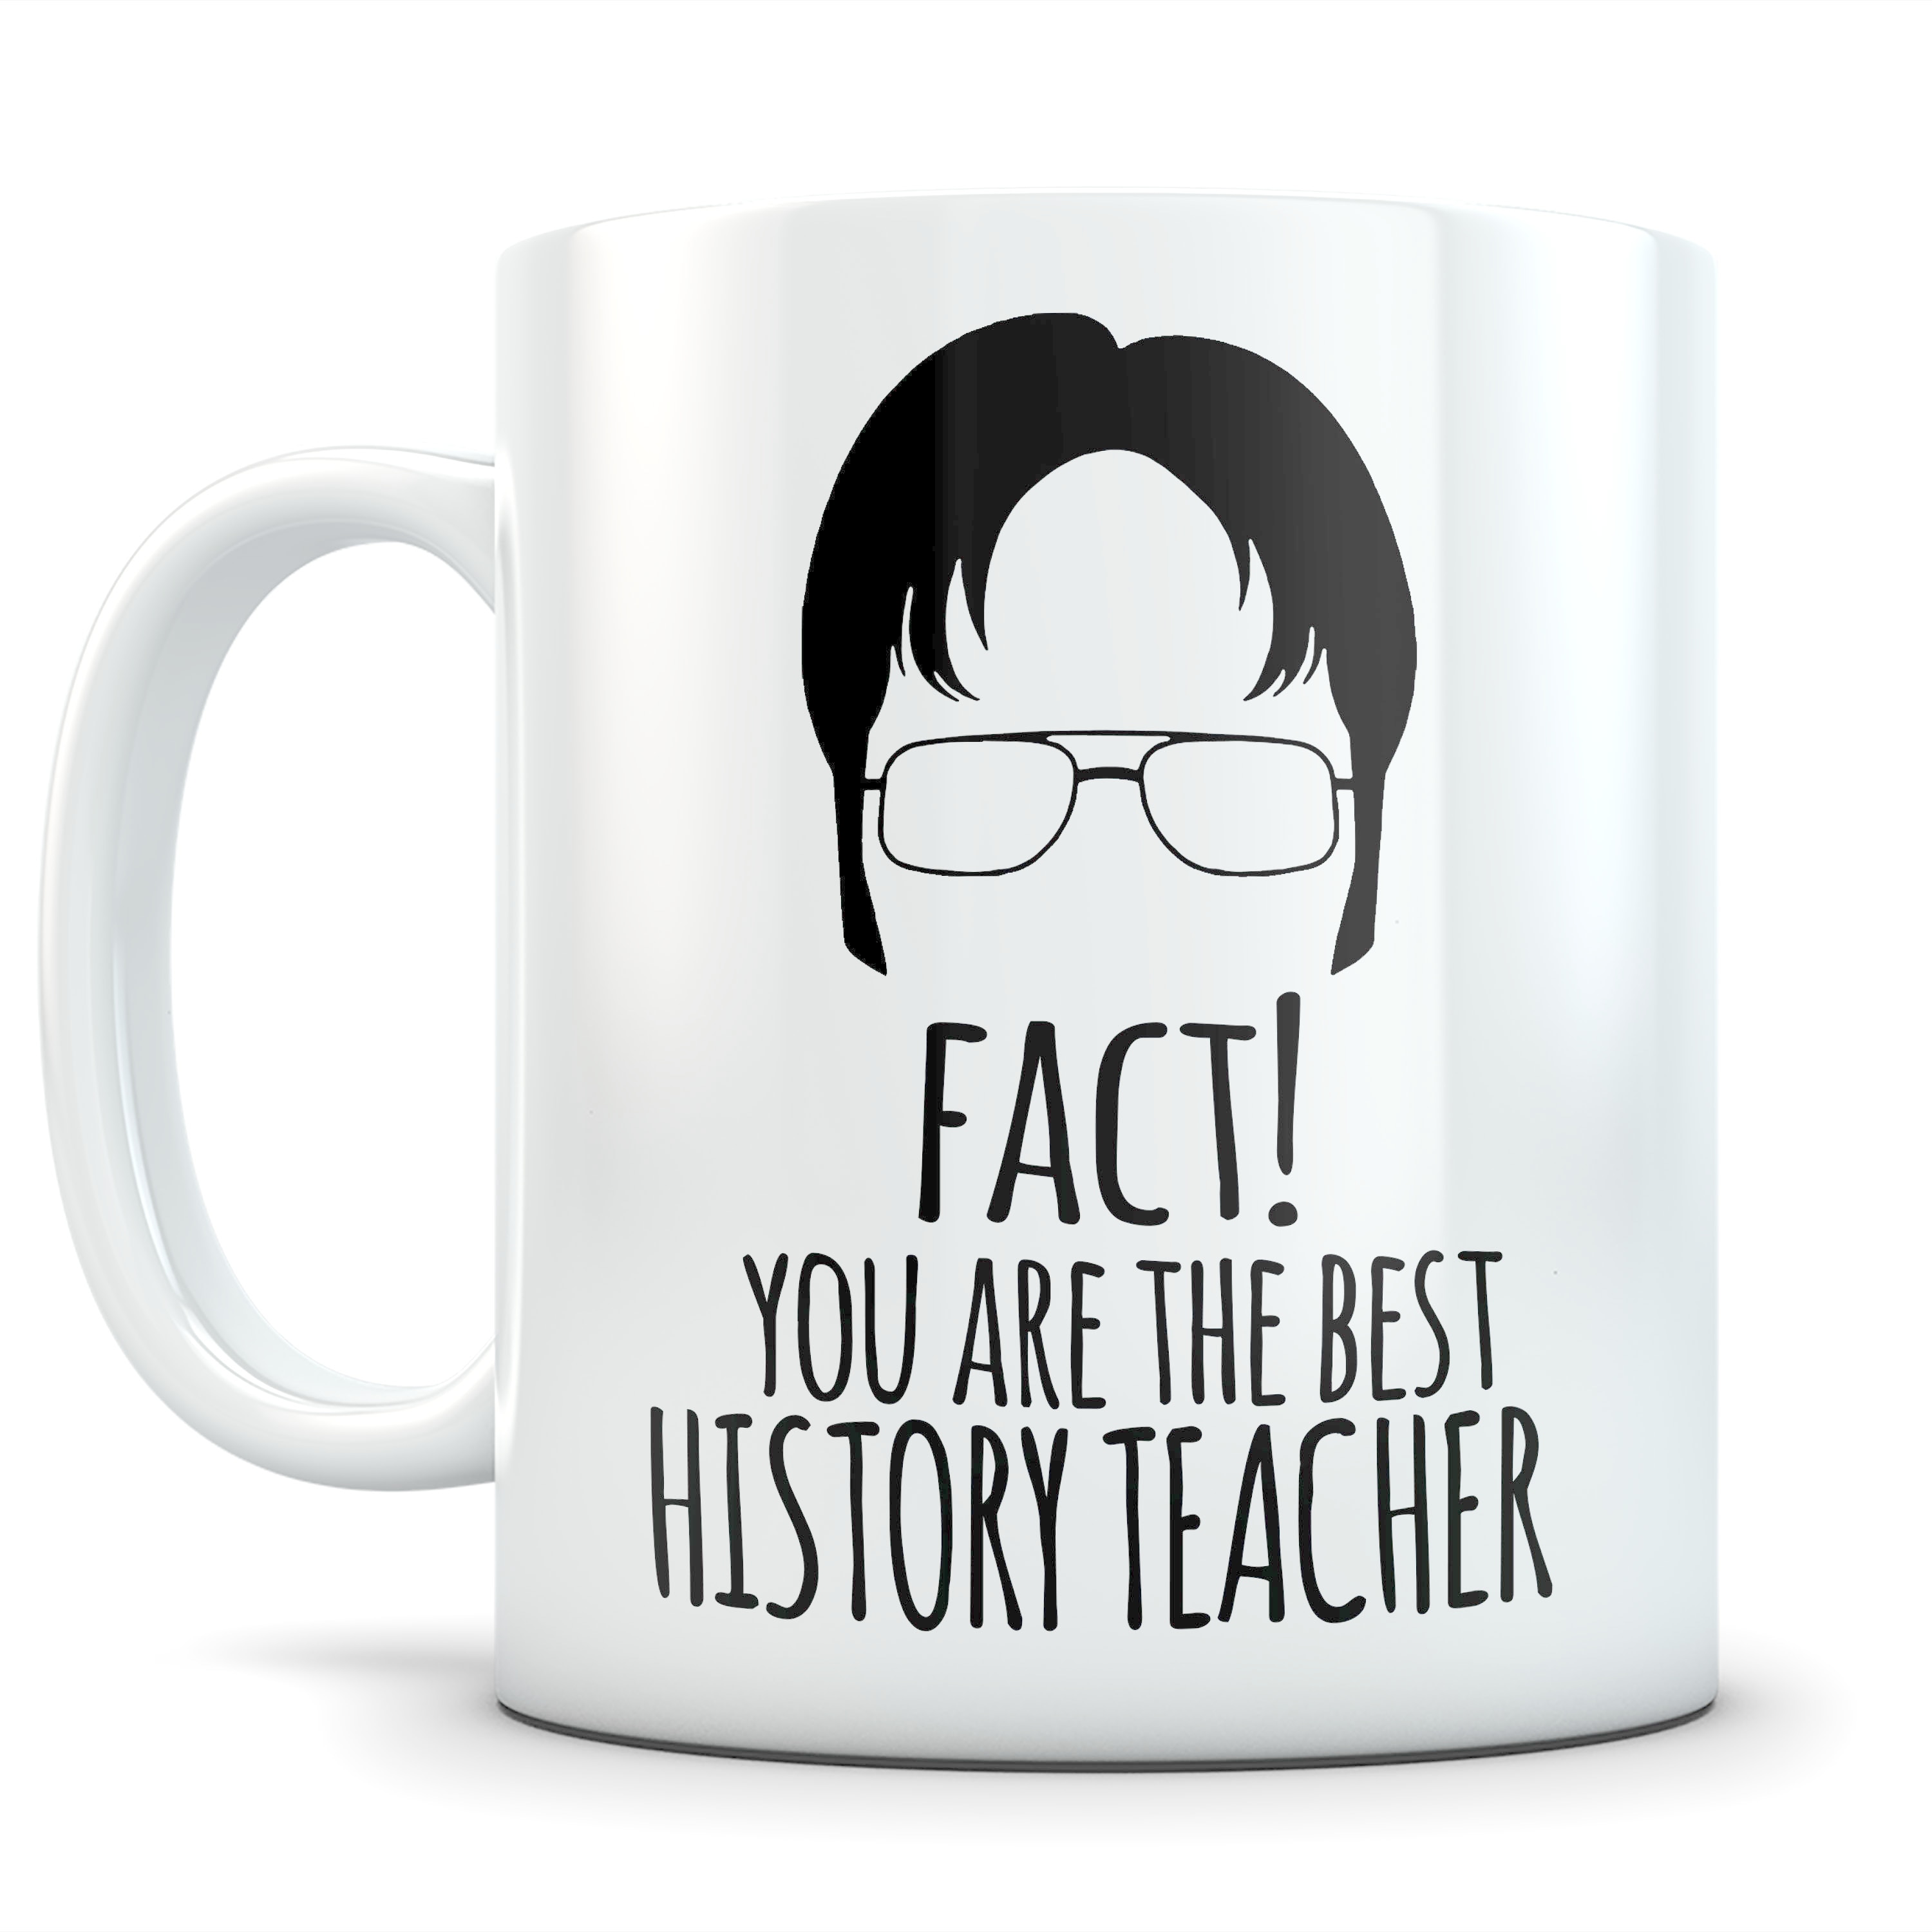 30 Best Gifts for History Teachers You Can Buy